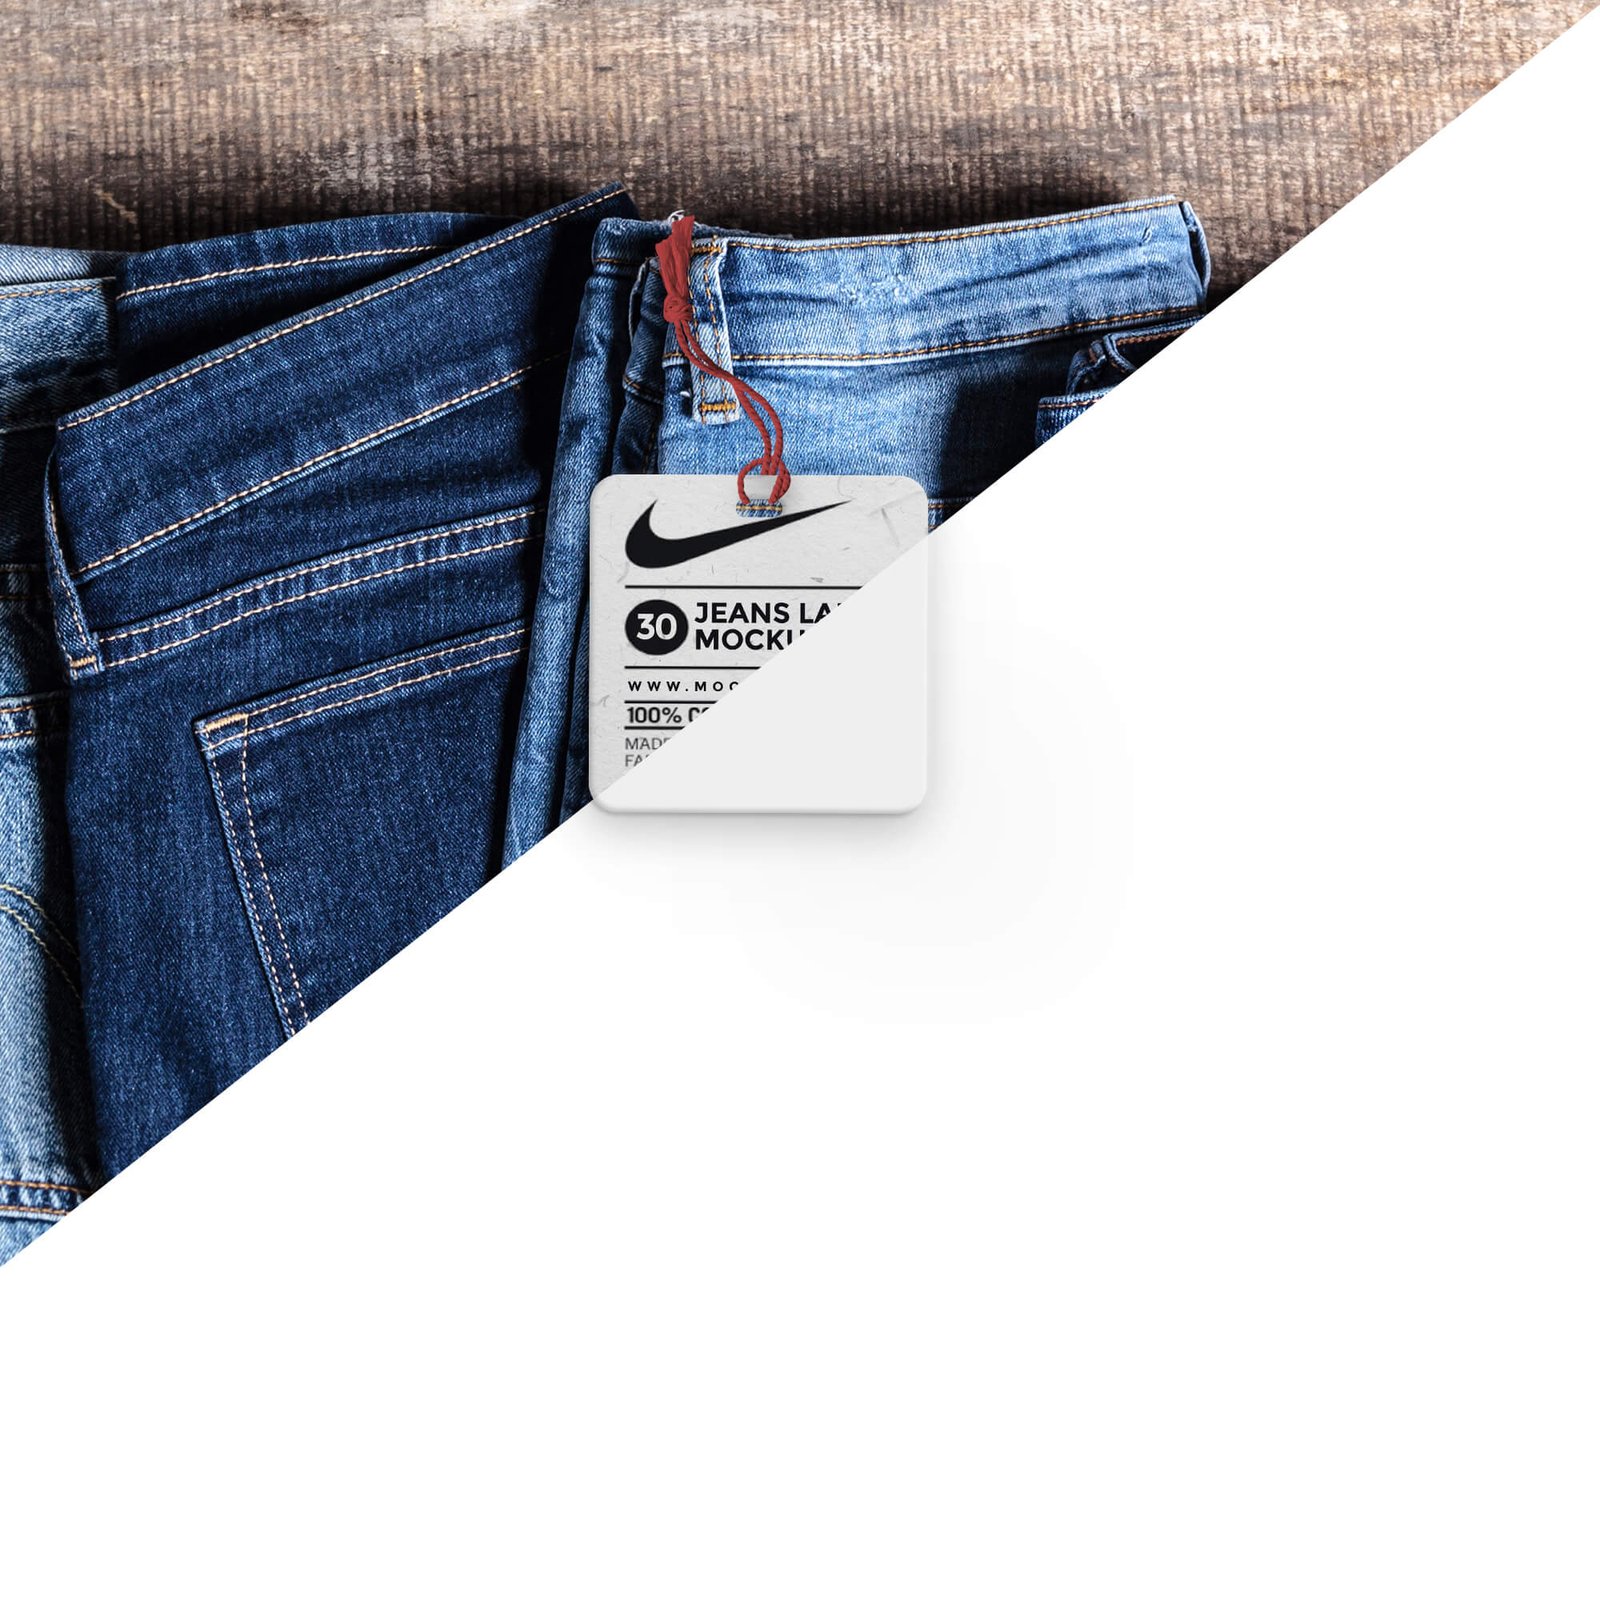 Editable Free Jeans Label Mockup PSD Template